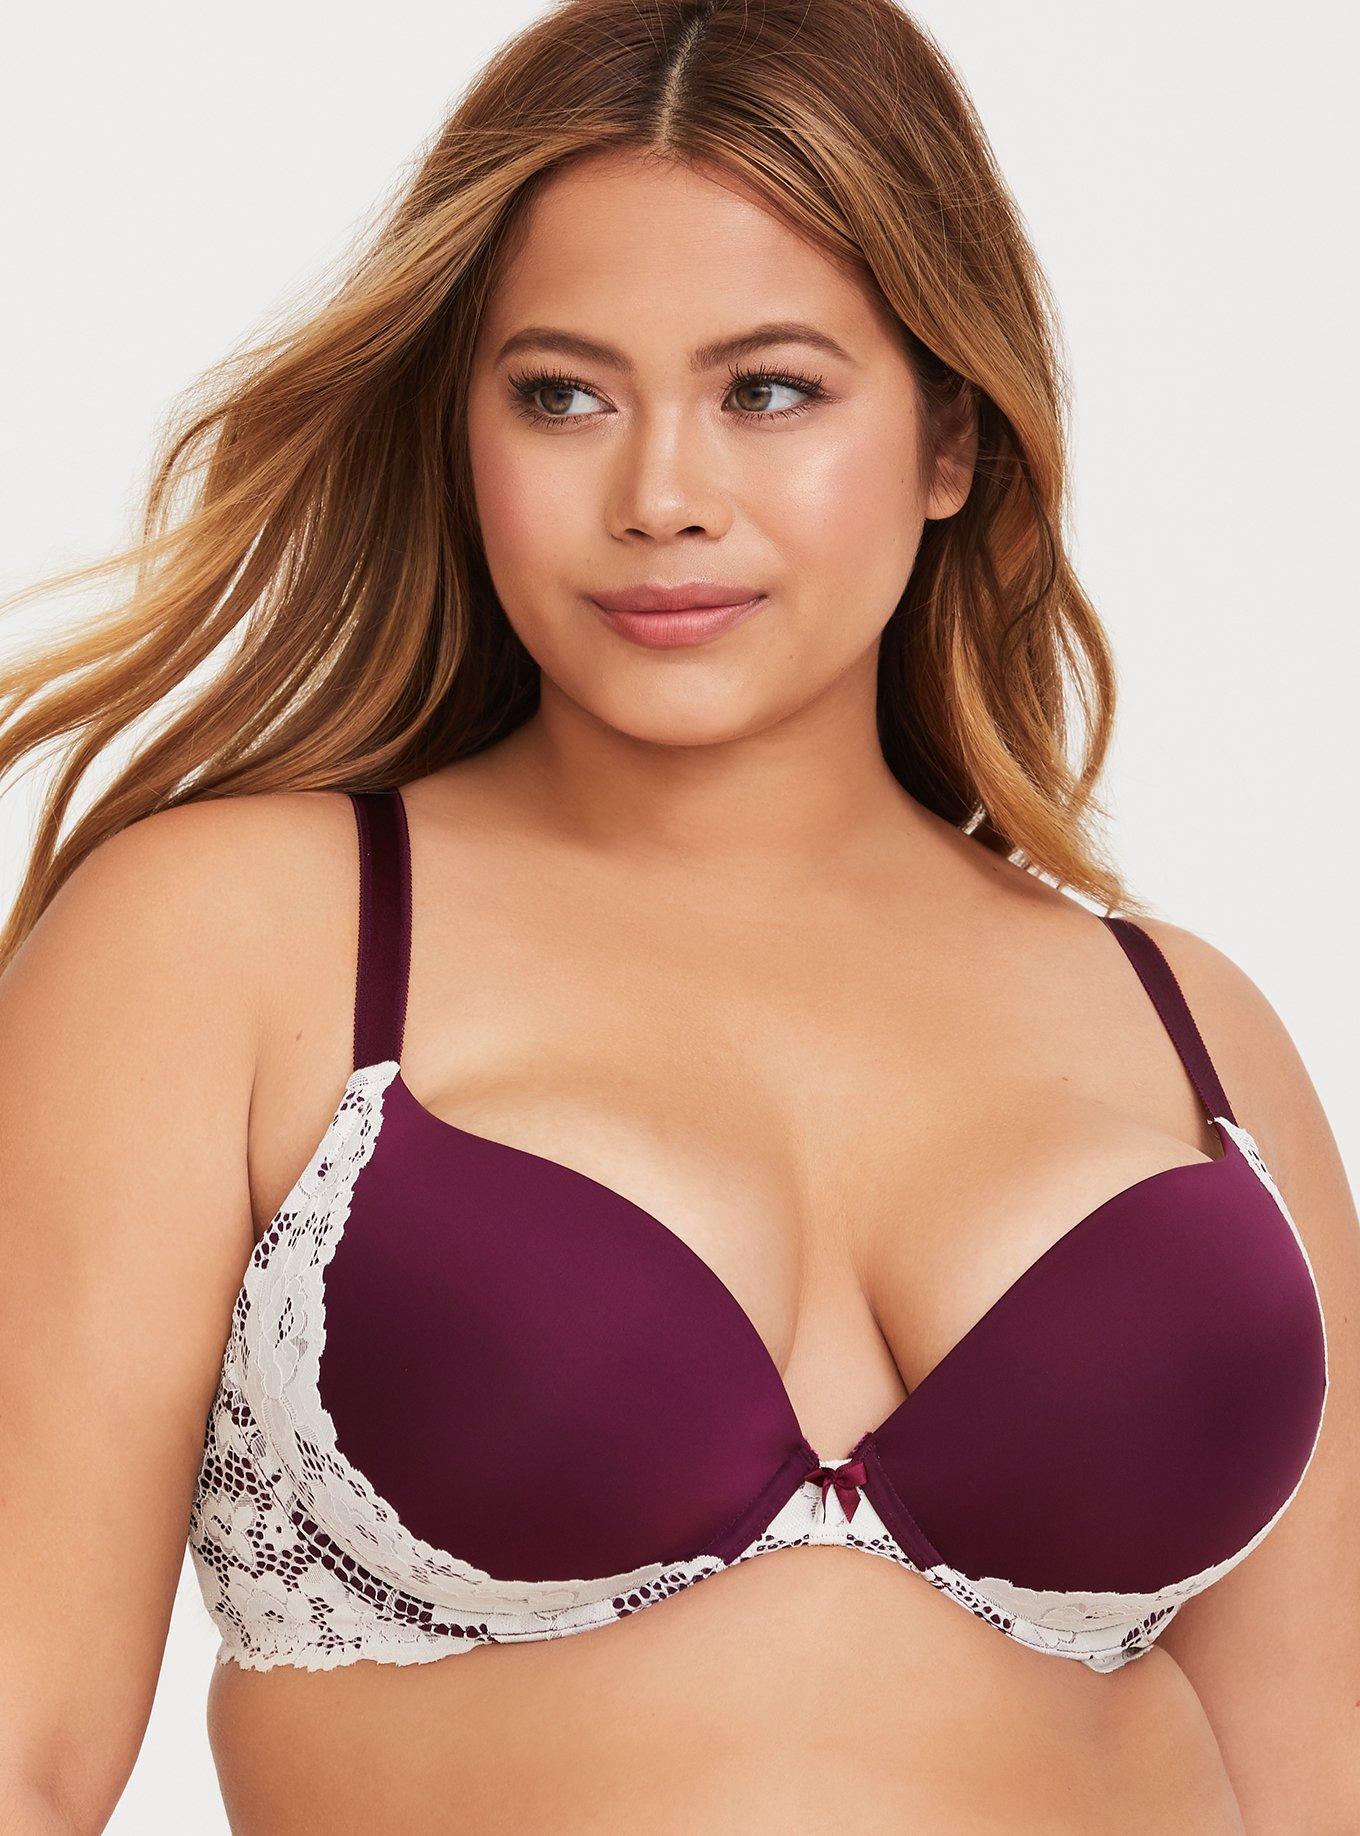 Lane Bryant - Pop in store TODAY for the Perfect Bra Fit Event